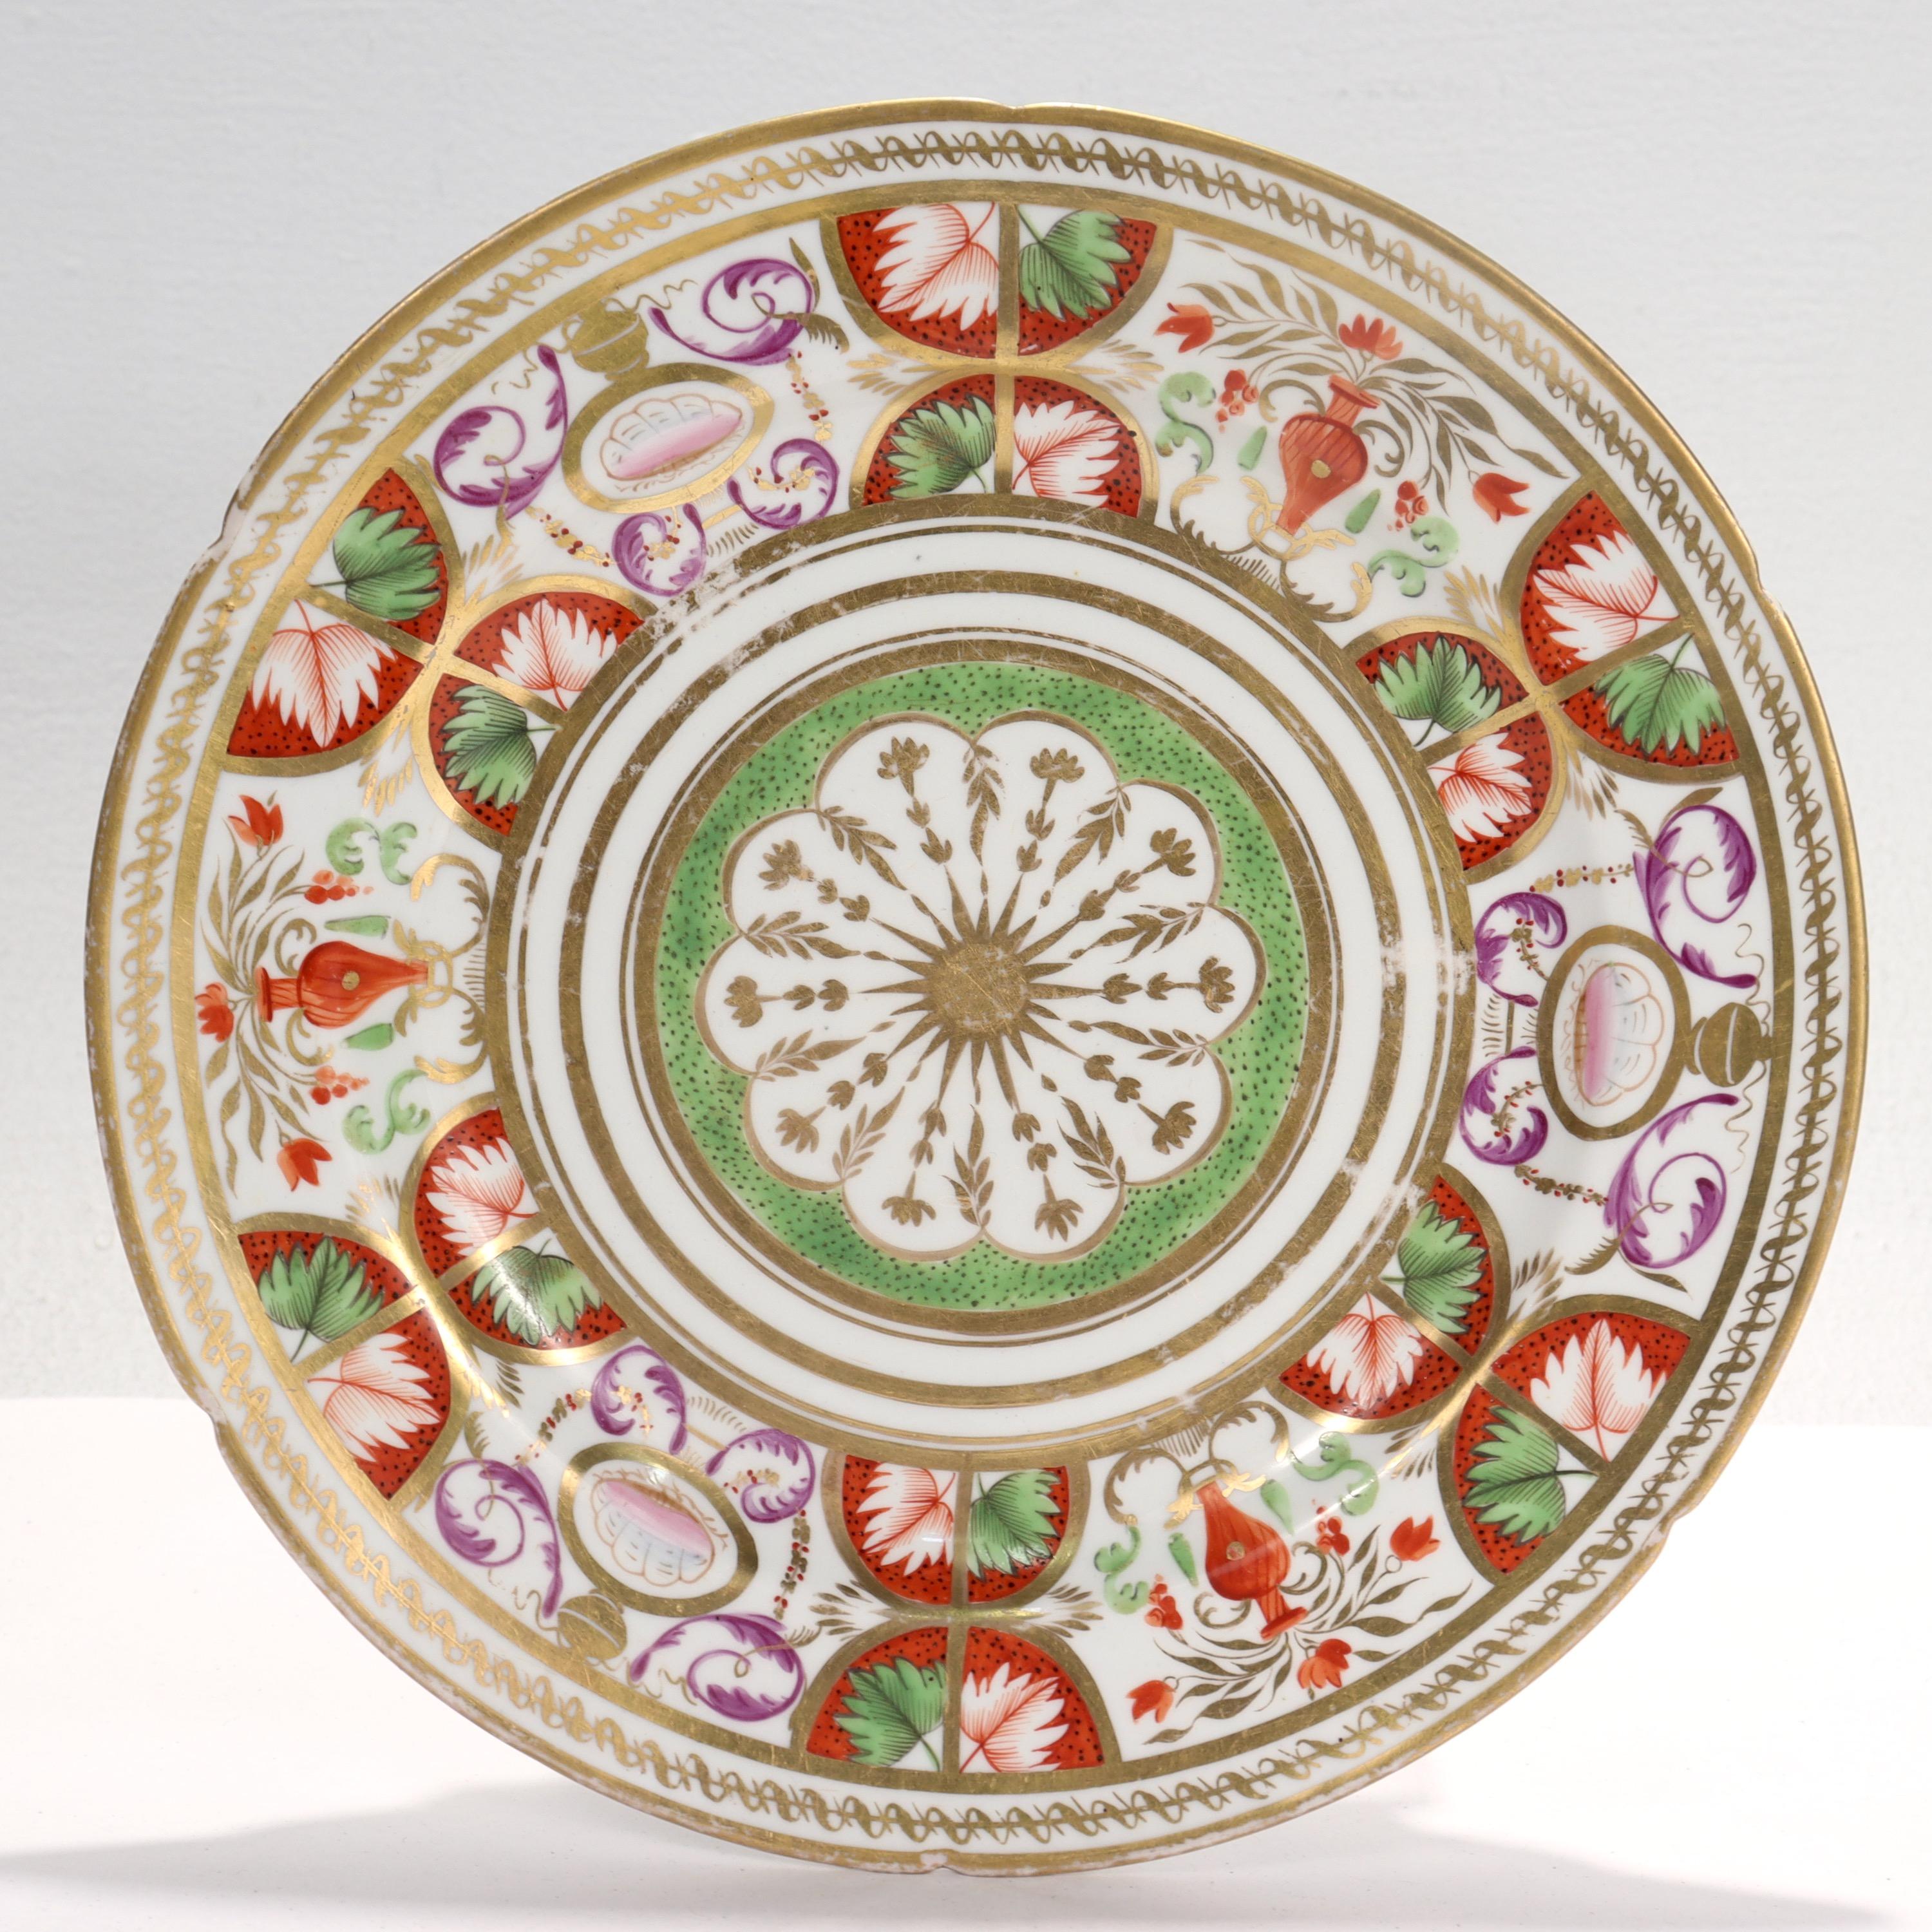 A fine antique English Neoclassical porcelain plate

Attributed to Coalport. 

Decorated throughout with rich gilding, and red, green, pink and purple floral devices.

With a shaped border.

Marked to the base with a gold sticker with